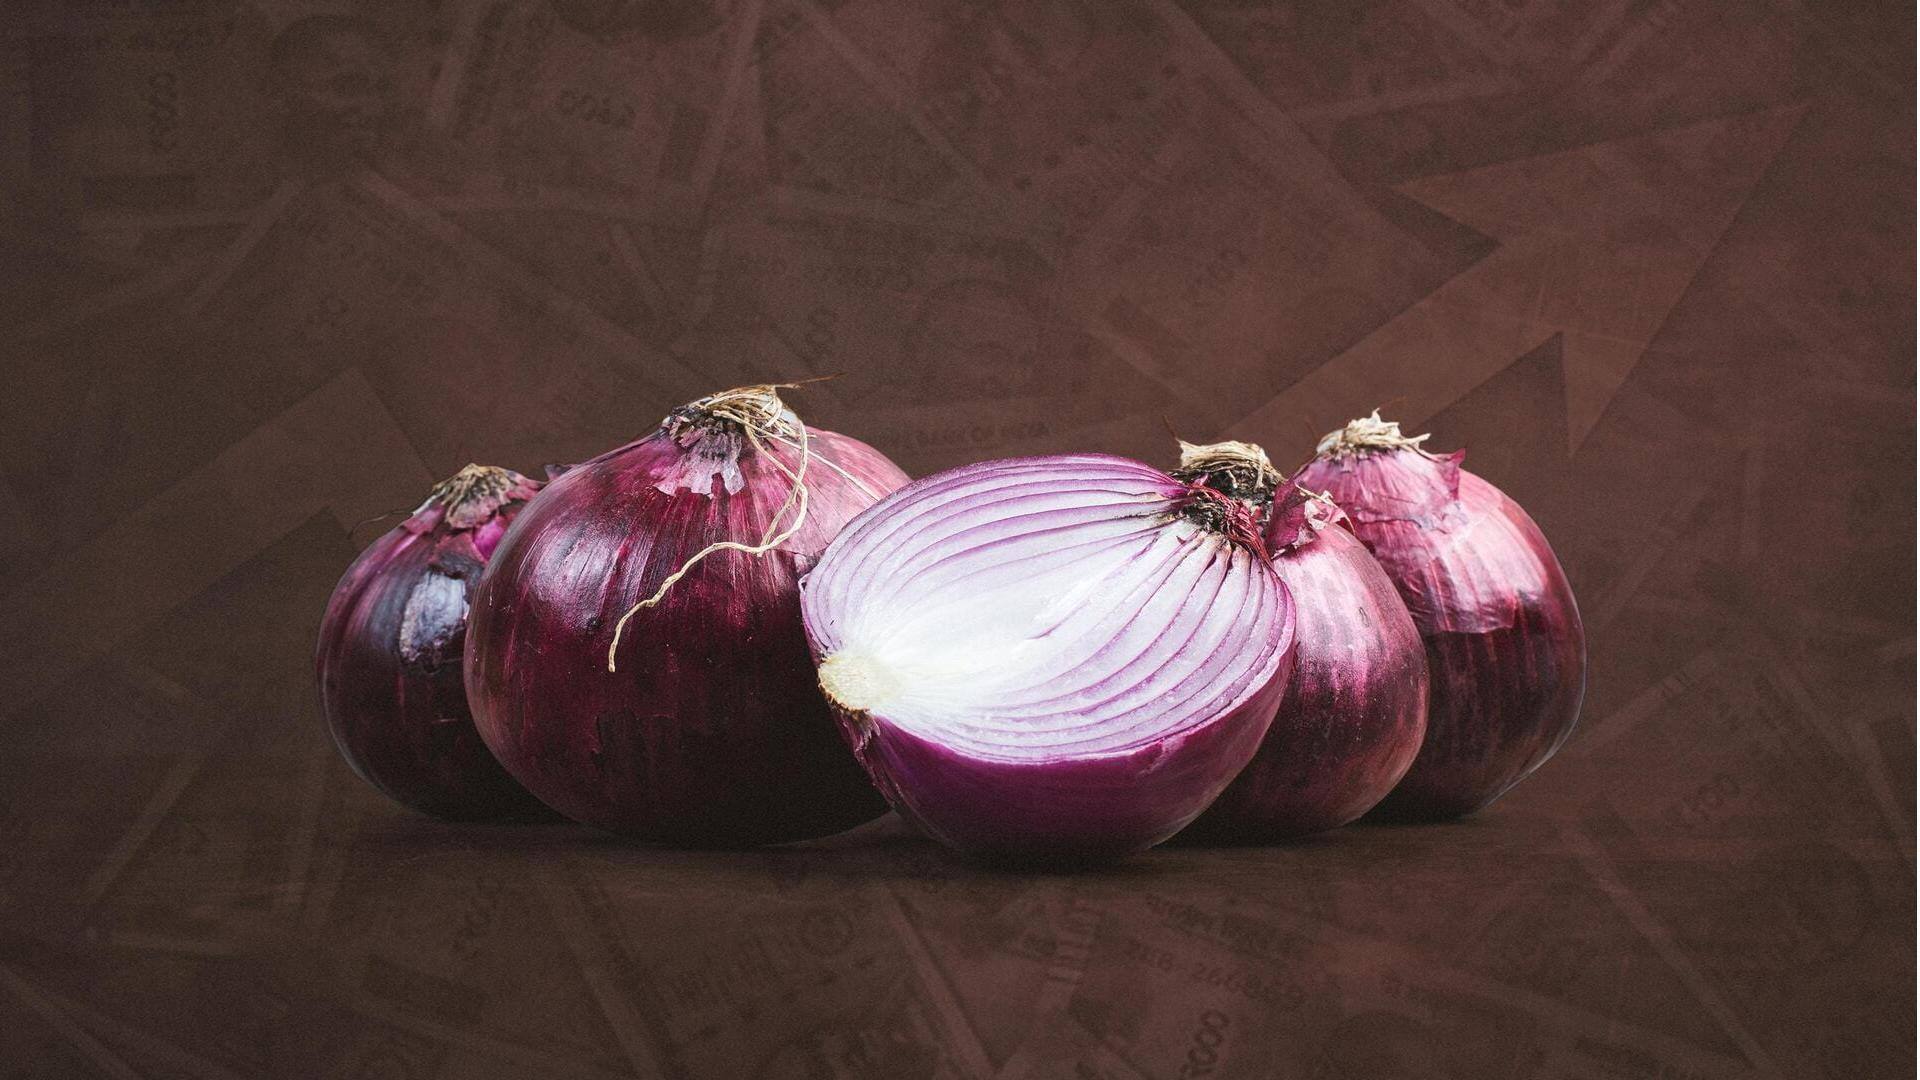 Delhi: Government to sell onions at subsidized rates from today